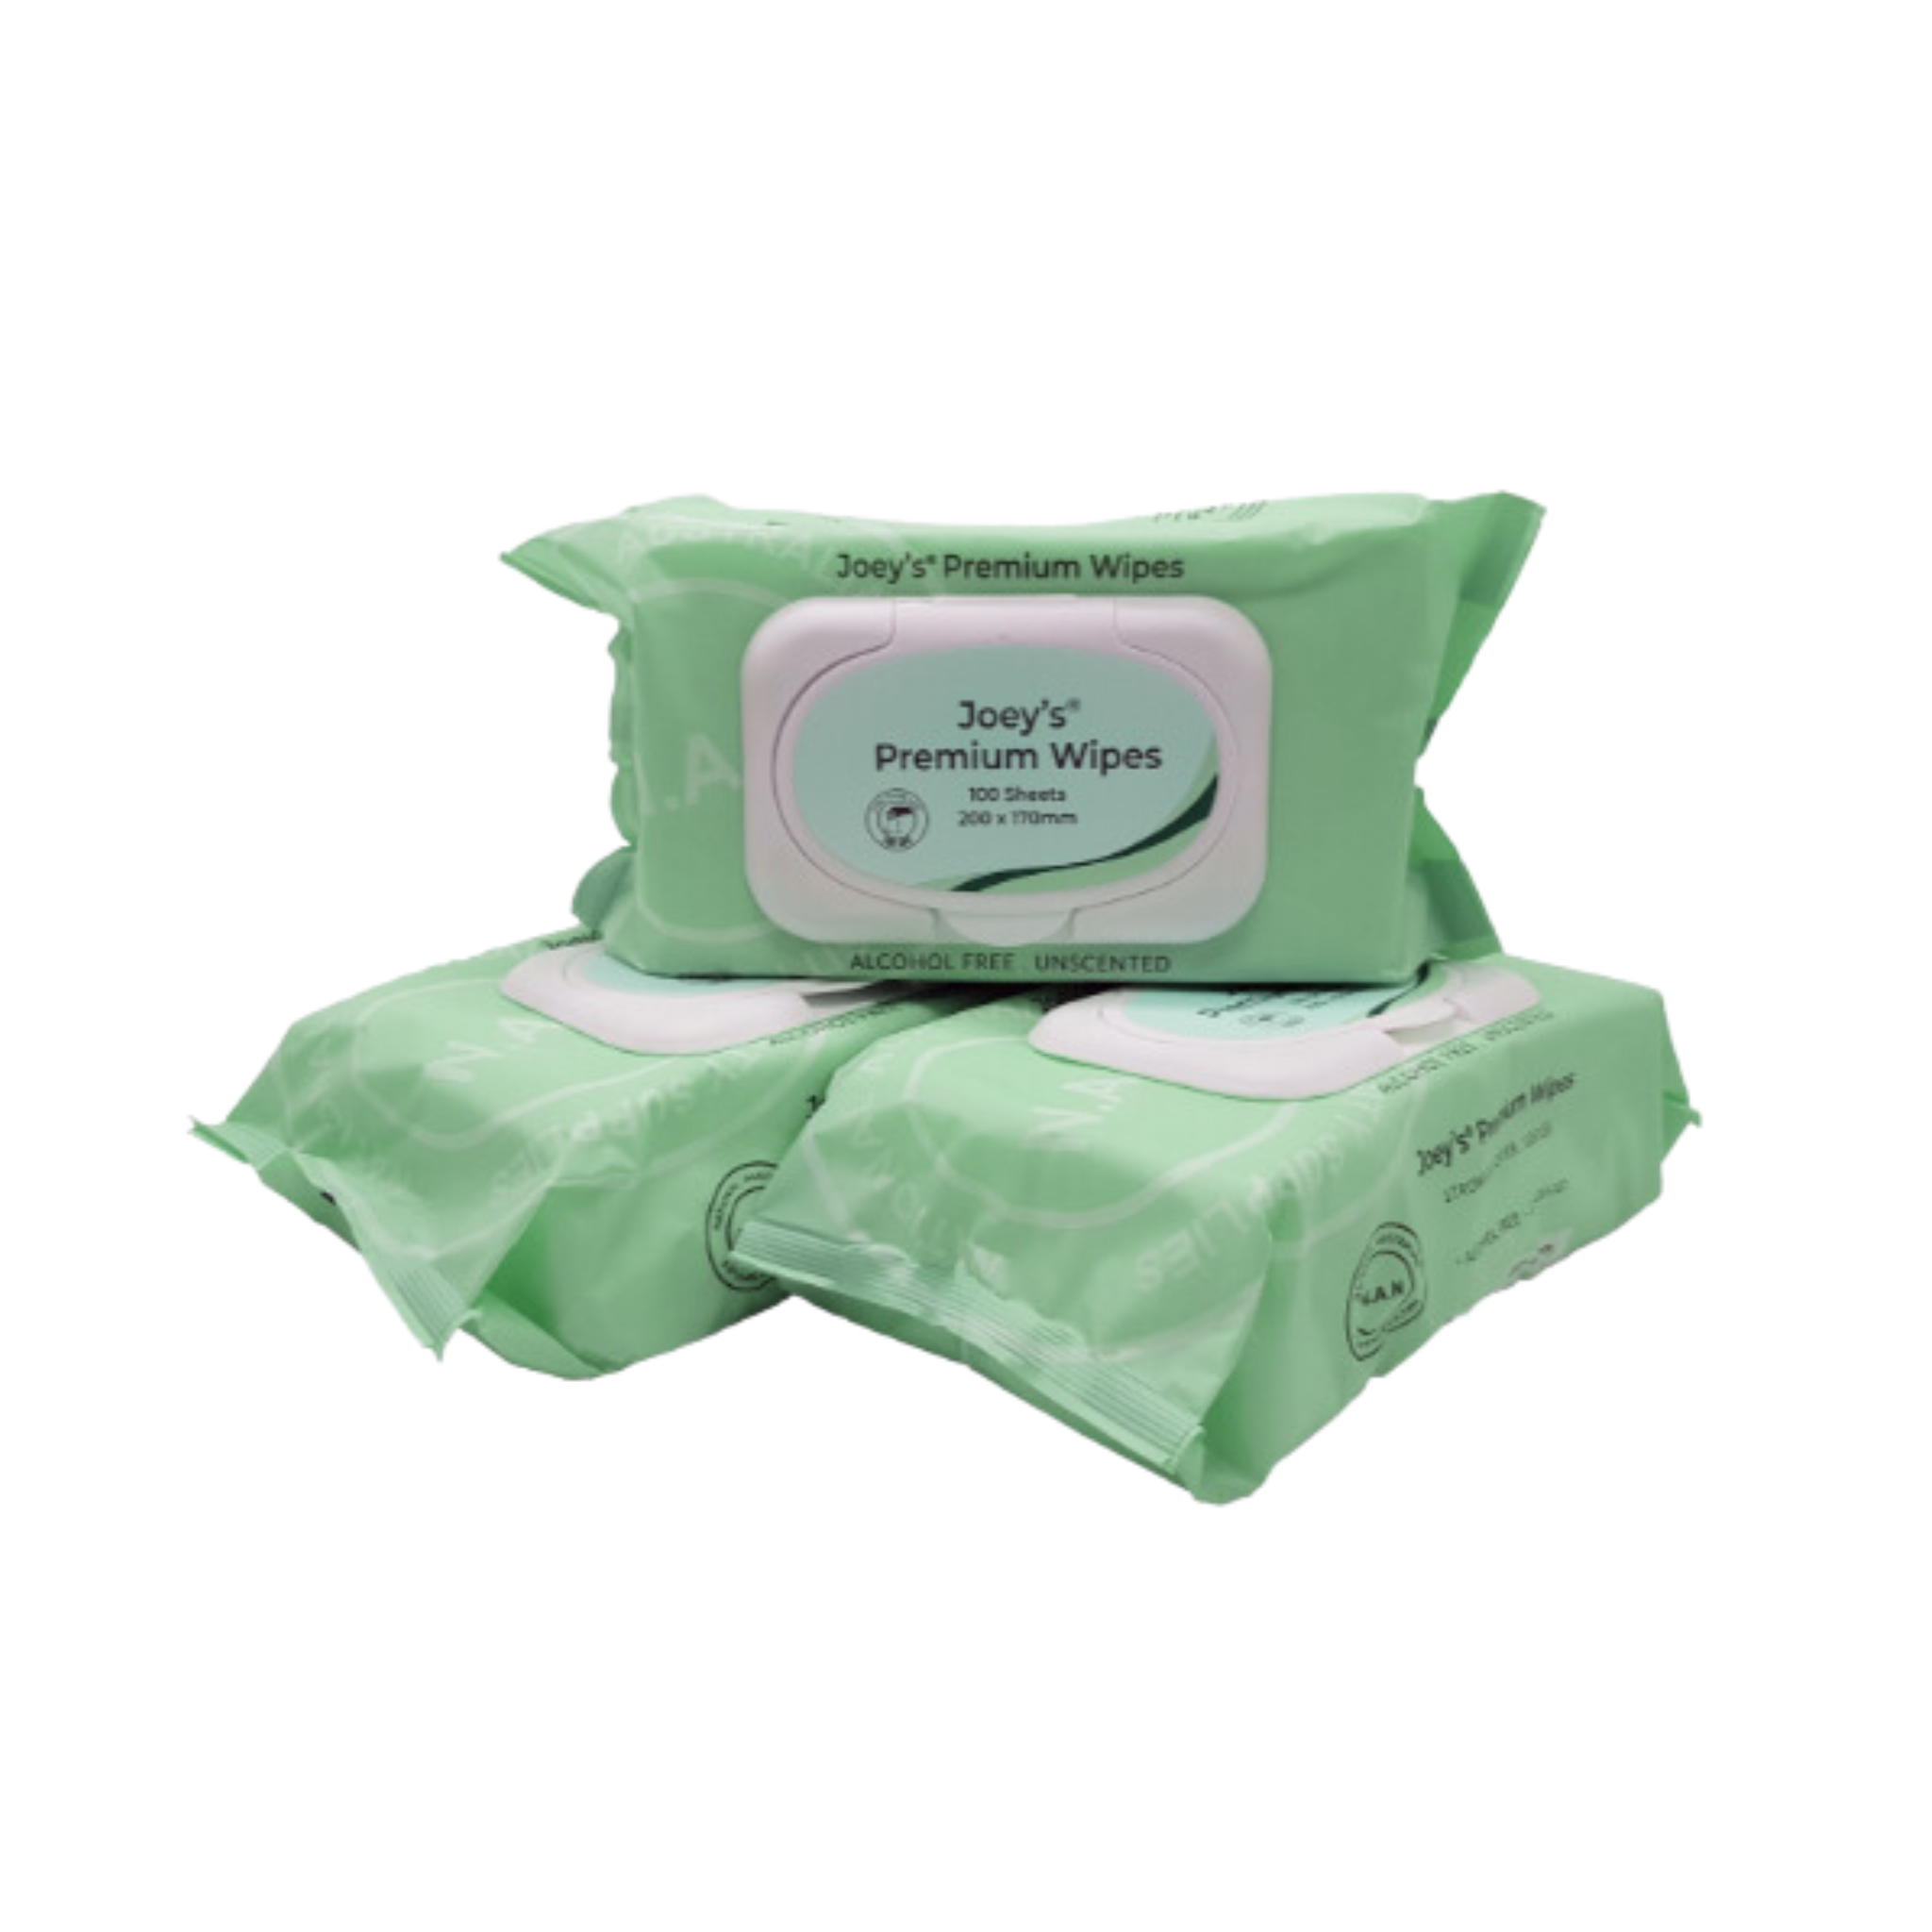 Joey Premium Wet Wipes Unscented Alc Free with Lid 12x100's